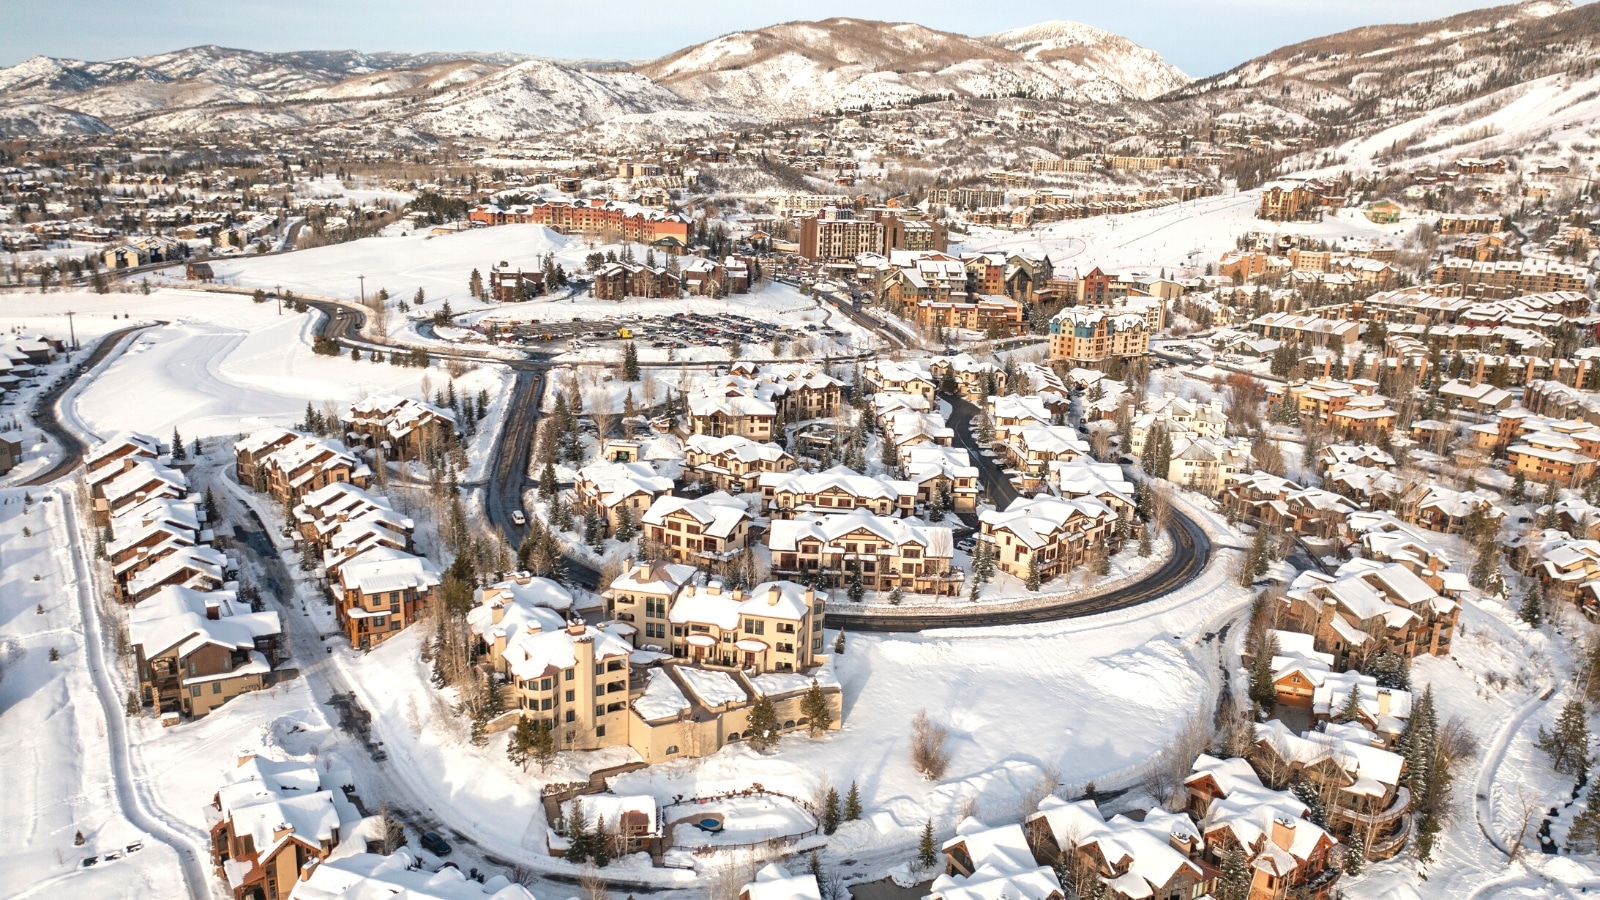 An aerial perspective capturing the snowy cityscape of Steamboat Springs. The image depicts a vast expanse of snow covering houses, rooftops, and the surrounding landscape. Numerous houses are visible within the snowy terrain. The hills in the background are also covered with snow.